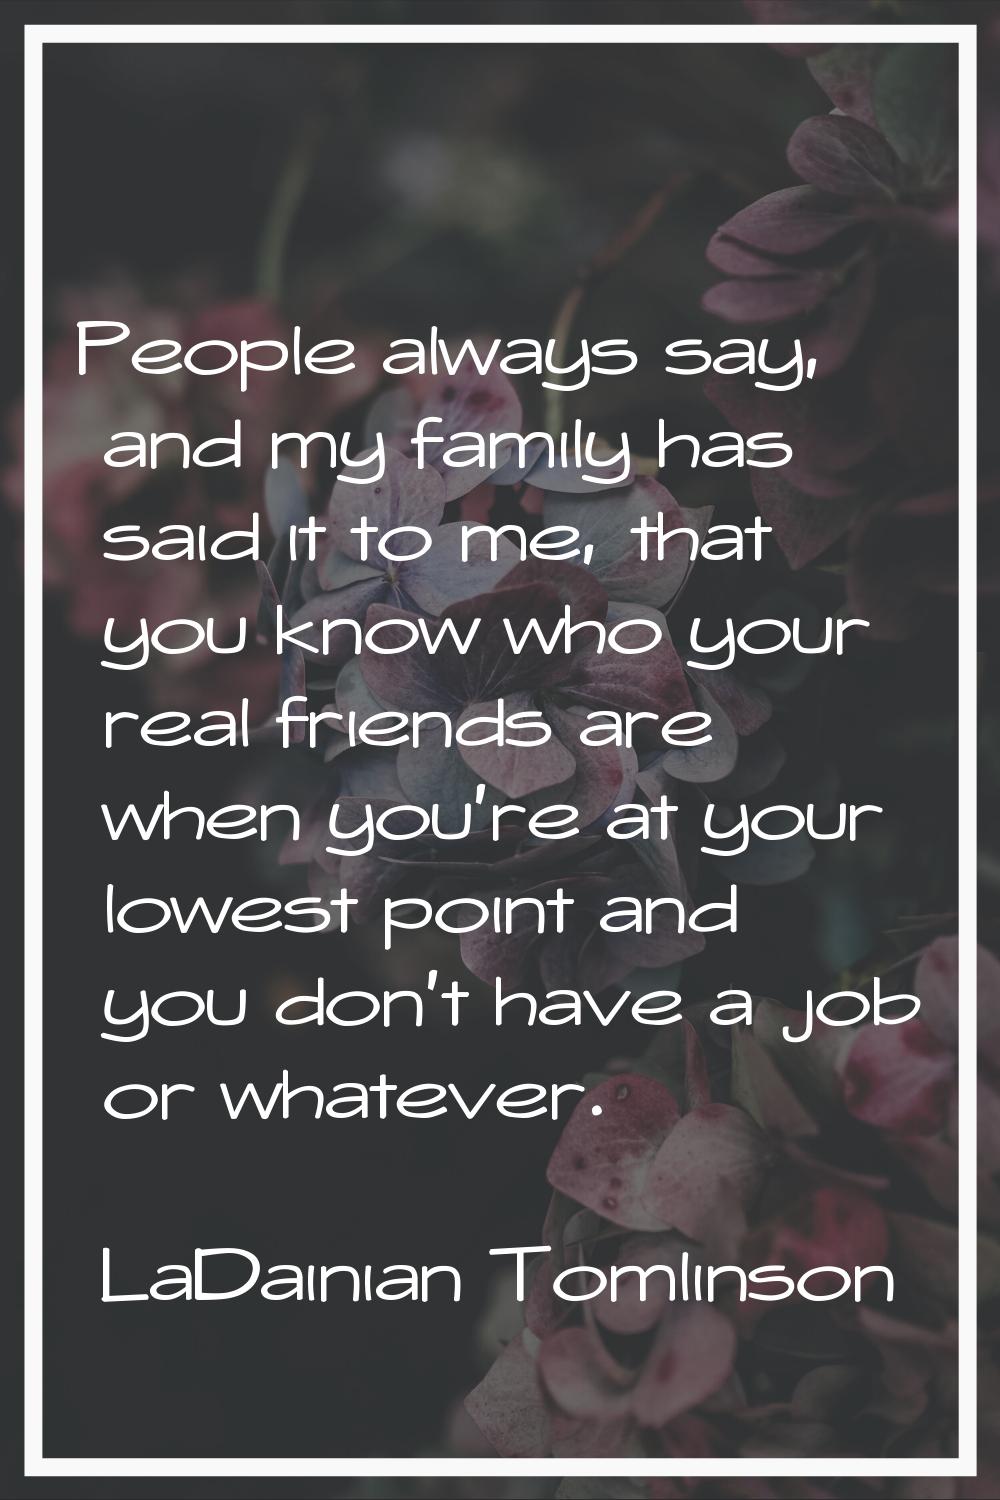 People always say, and my family has said it to me, that you know who your real friends are when yo